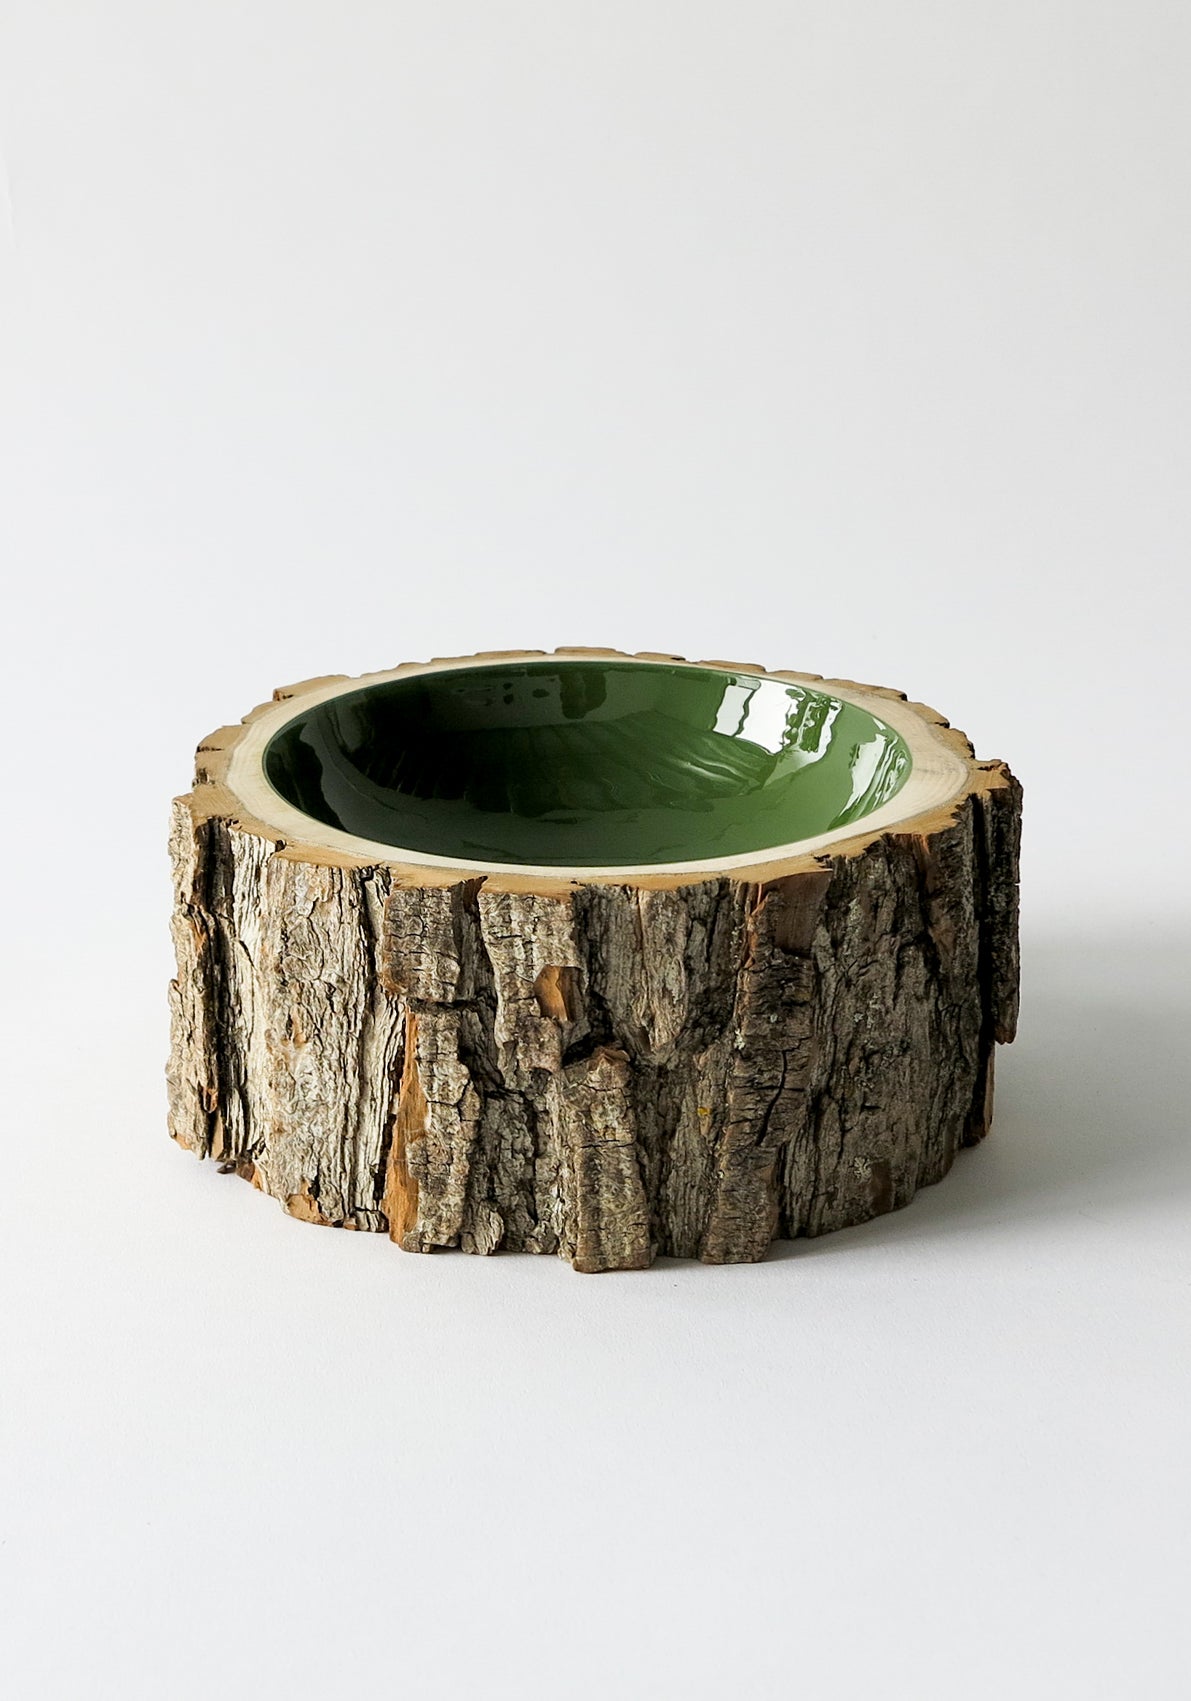 Size 7 Log Bowl - Medium to large wooden bowl with rough bark, glossy interior is a rich olive colour.